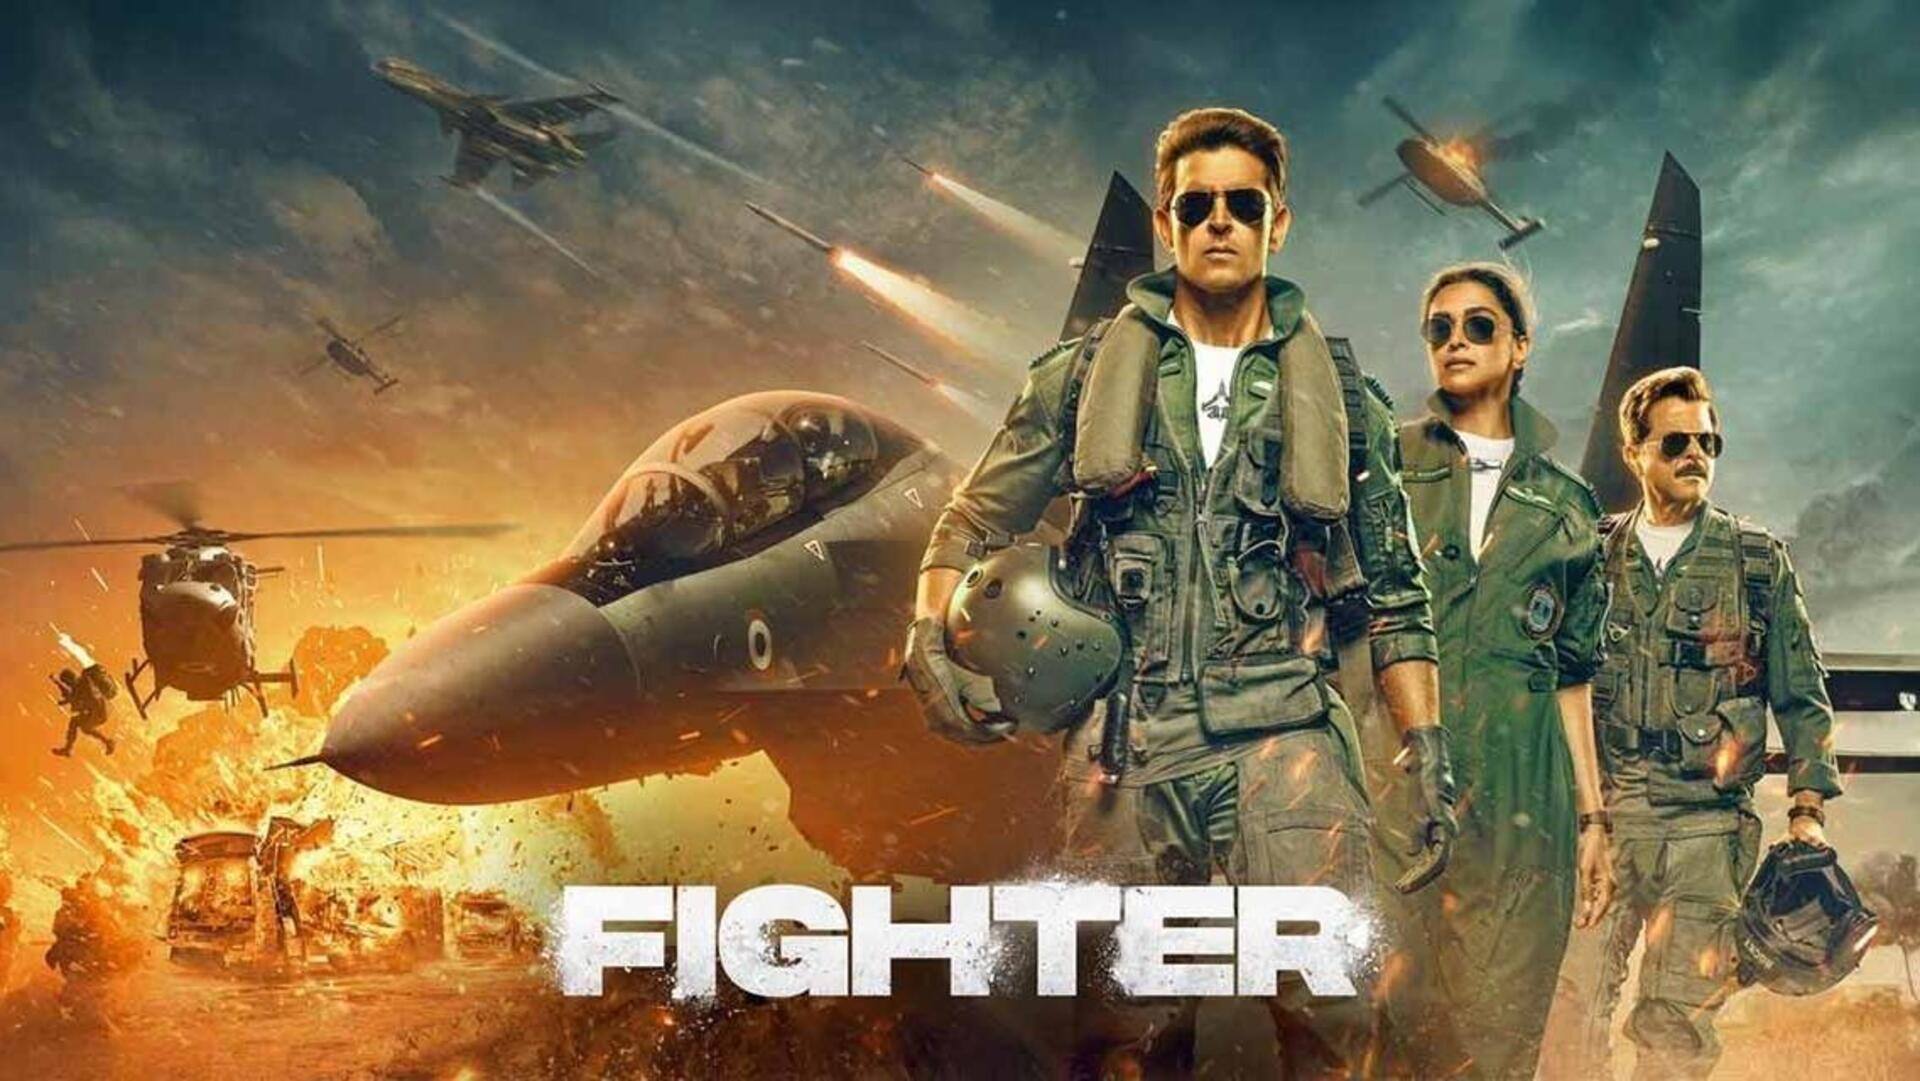 Box office buzz: 'Fighter' aims for Rs. 25cr opening domestically